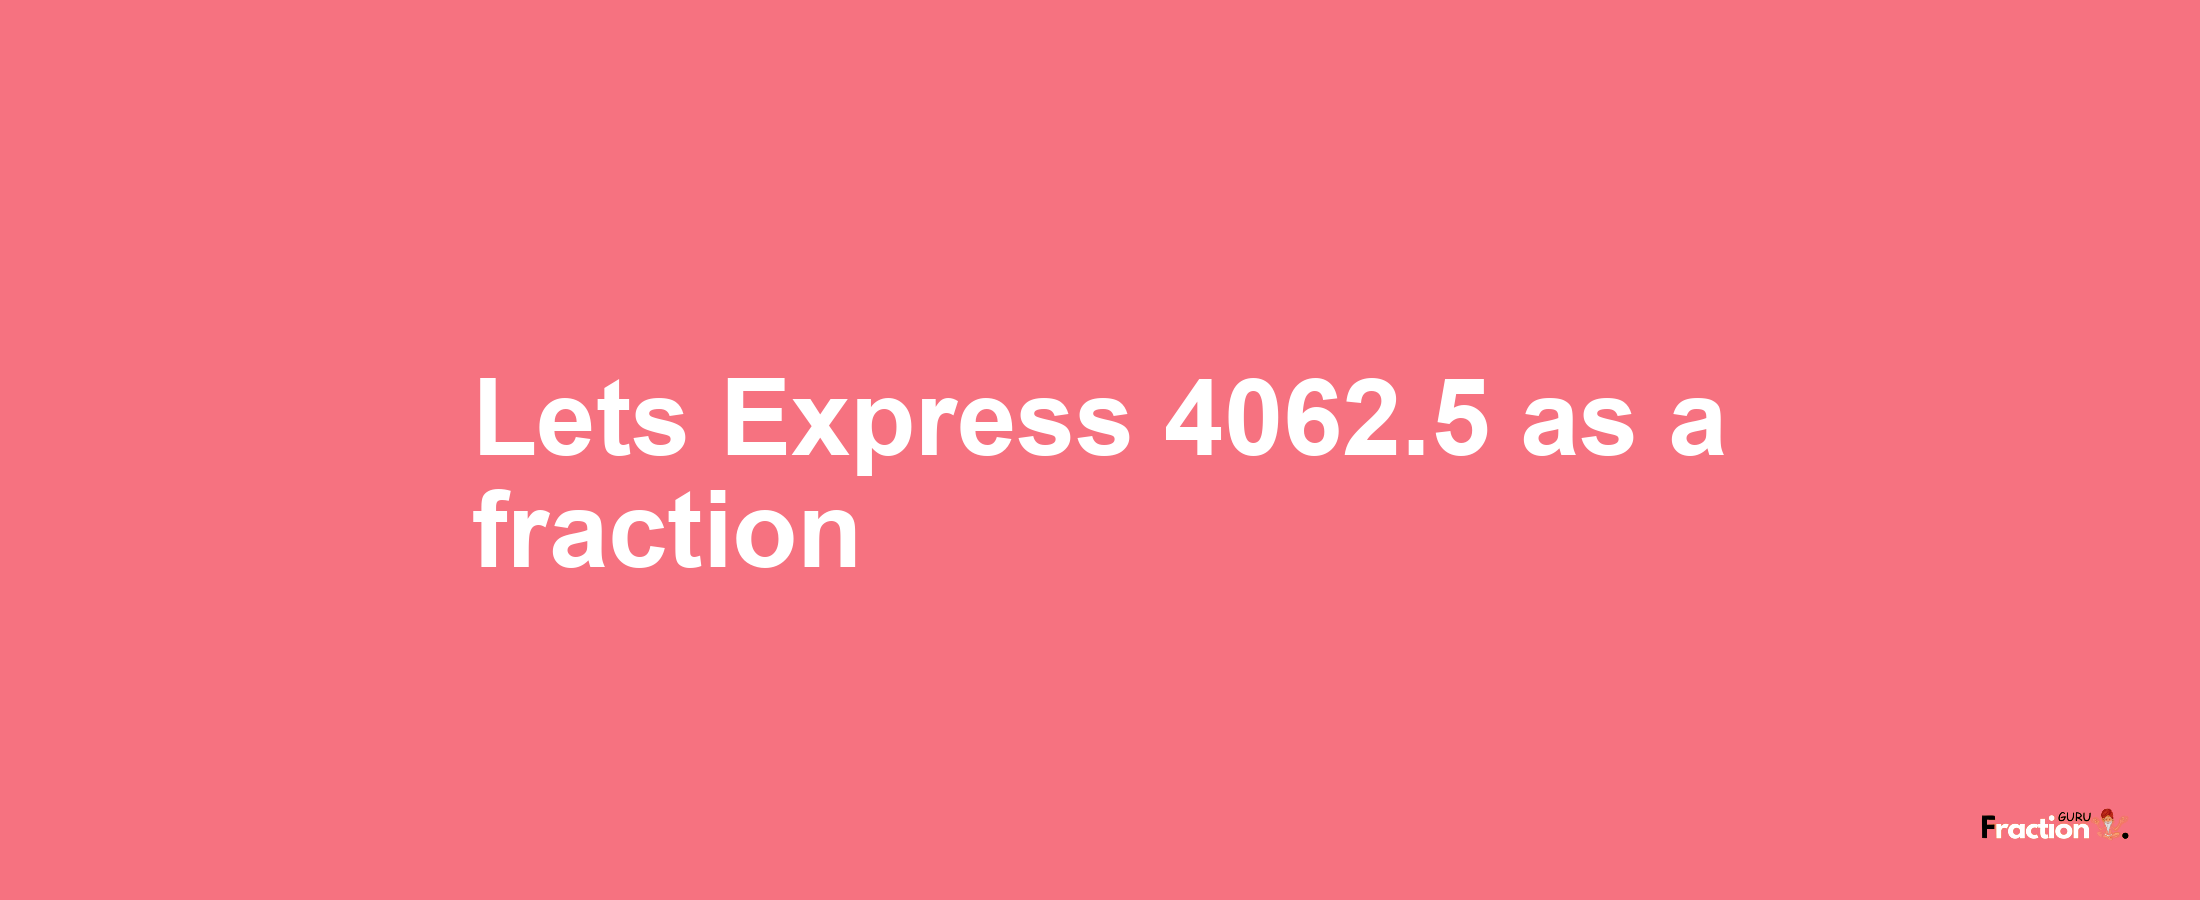 Lets Express 4062.5 as afraction